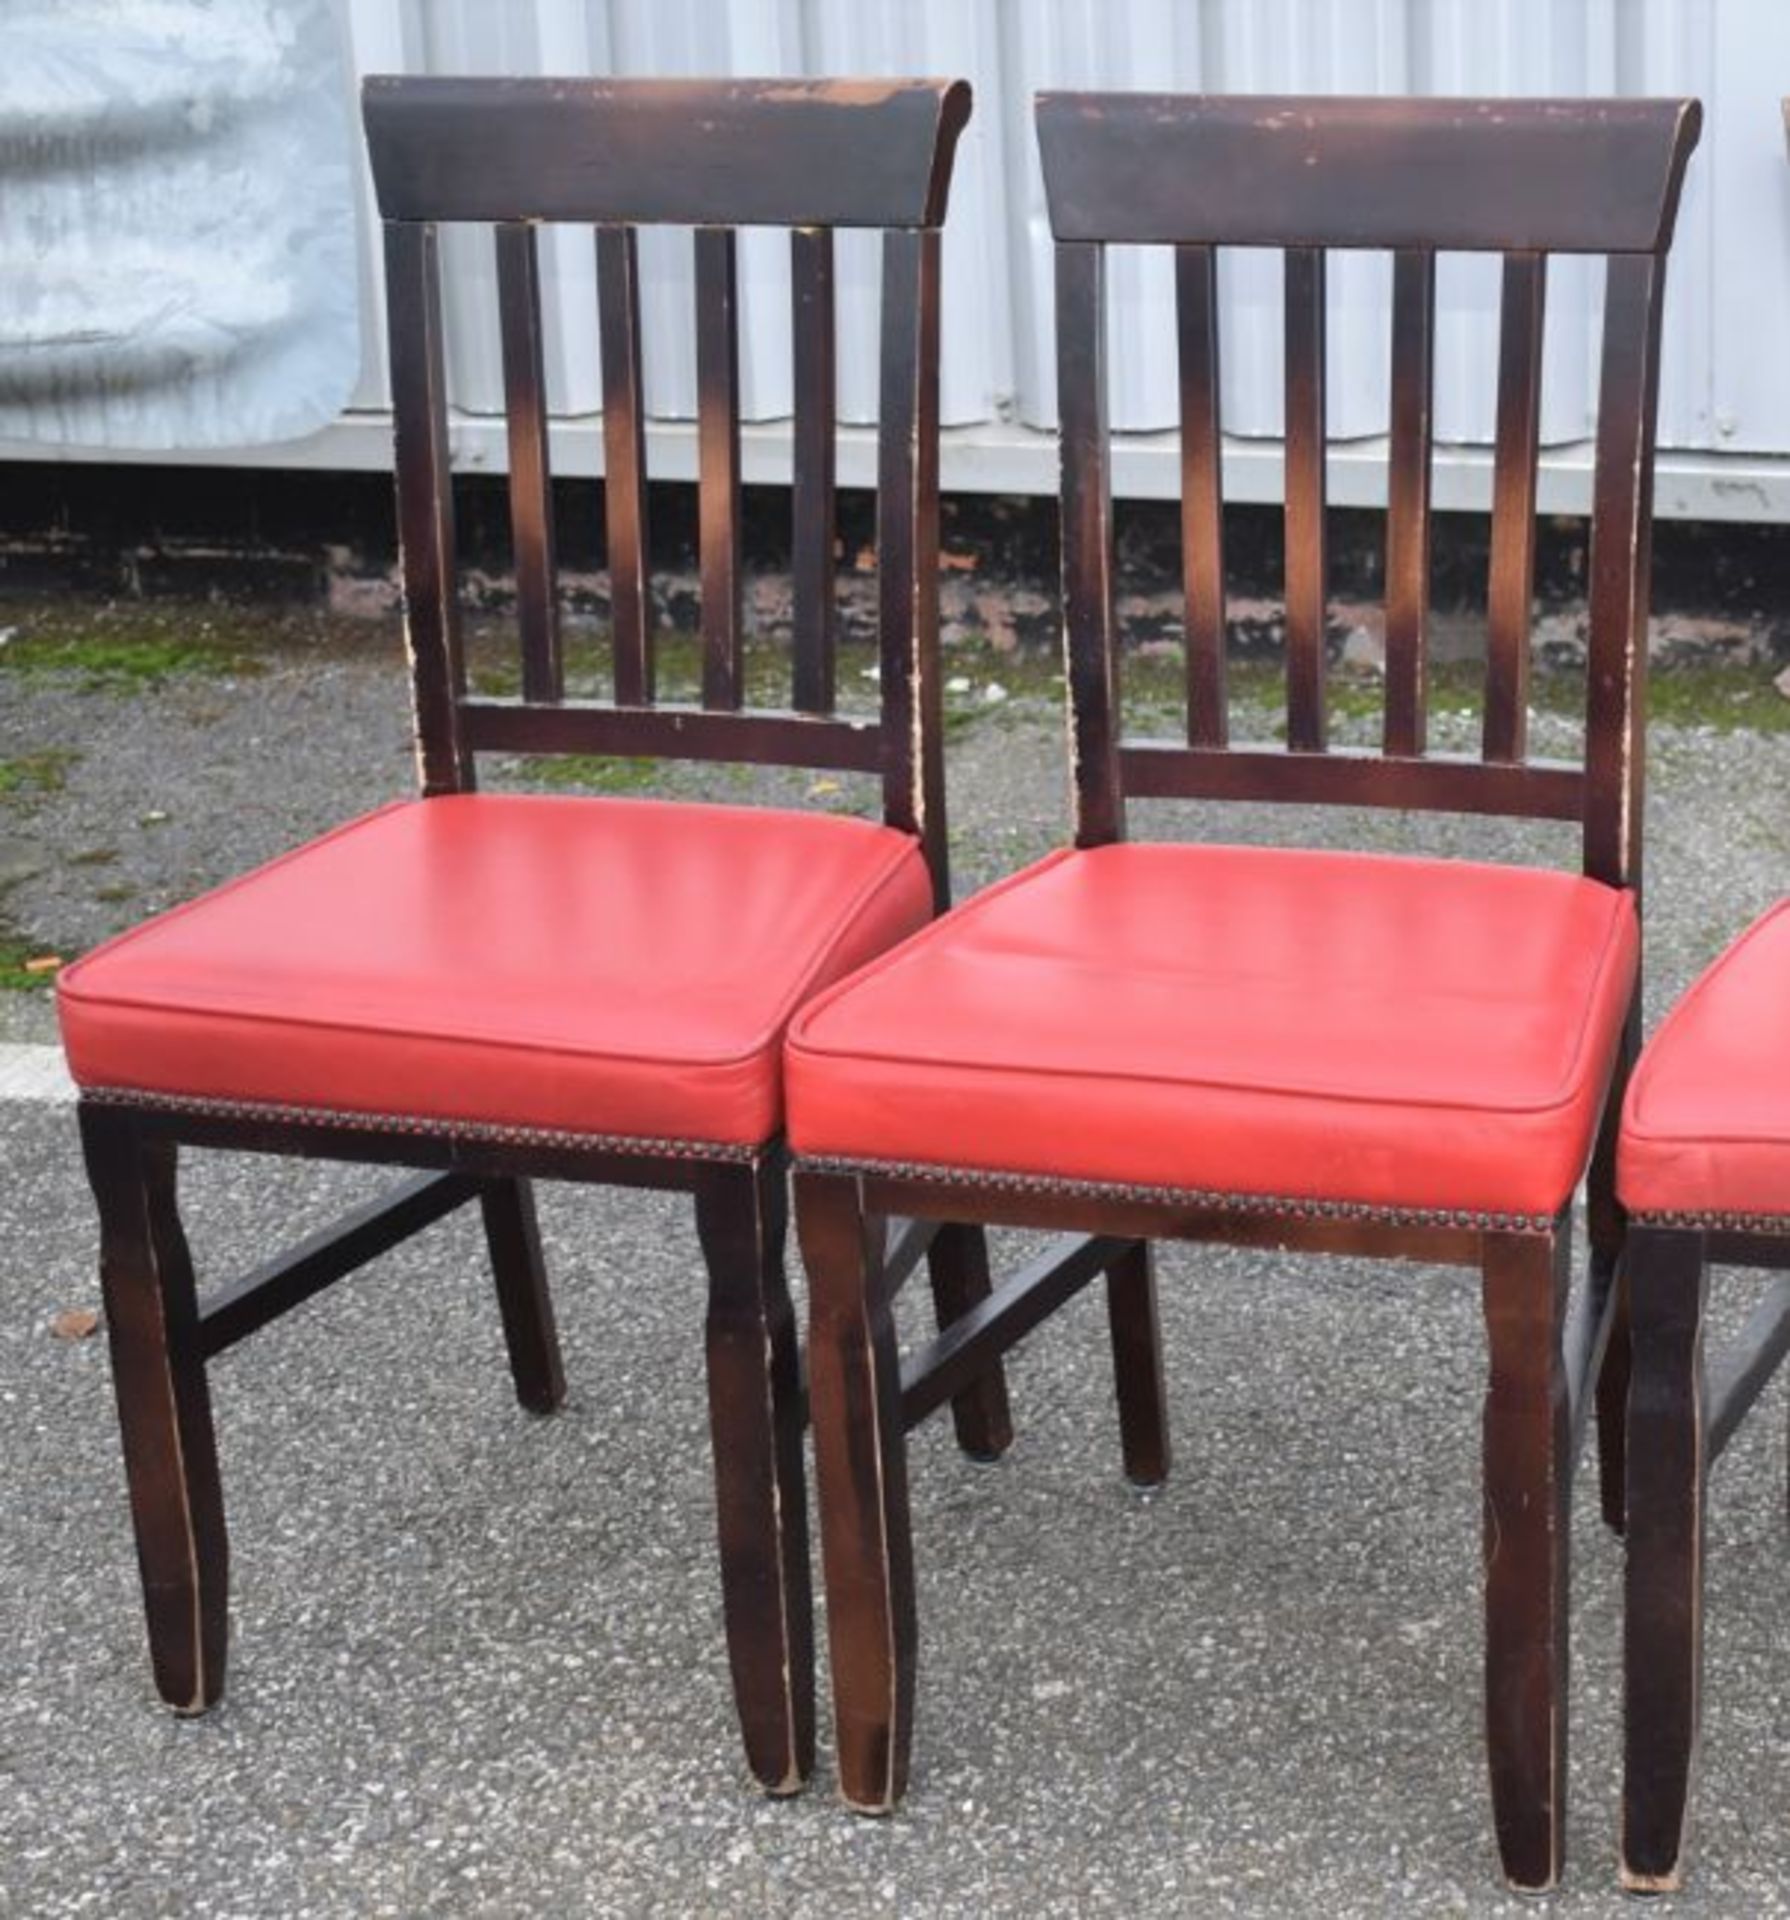 8 x Restaurant Dining Chairs With Dark Stained Wood Finish and Red Leather Seat Pads - Recently - Image 7 of 7